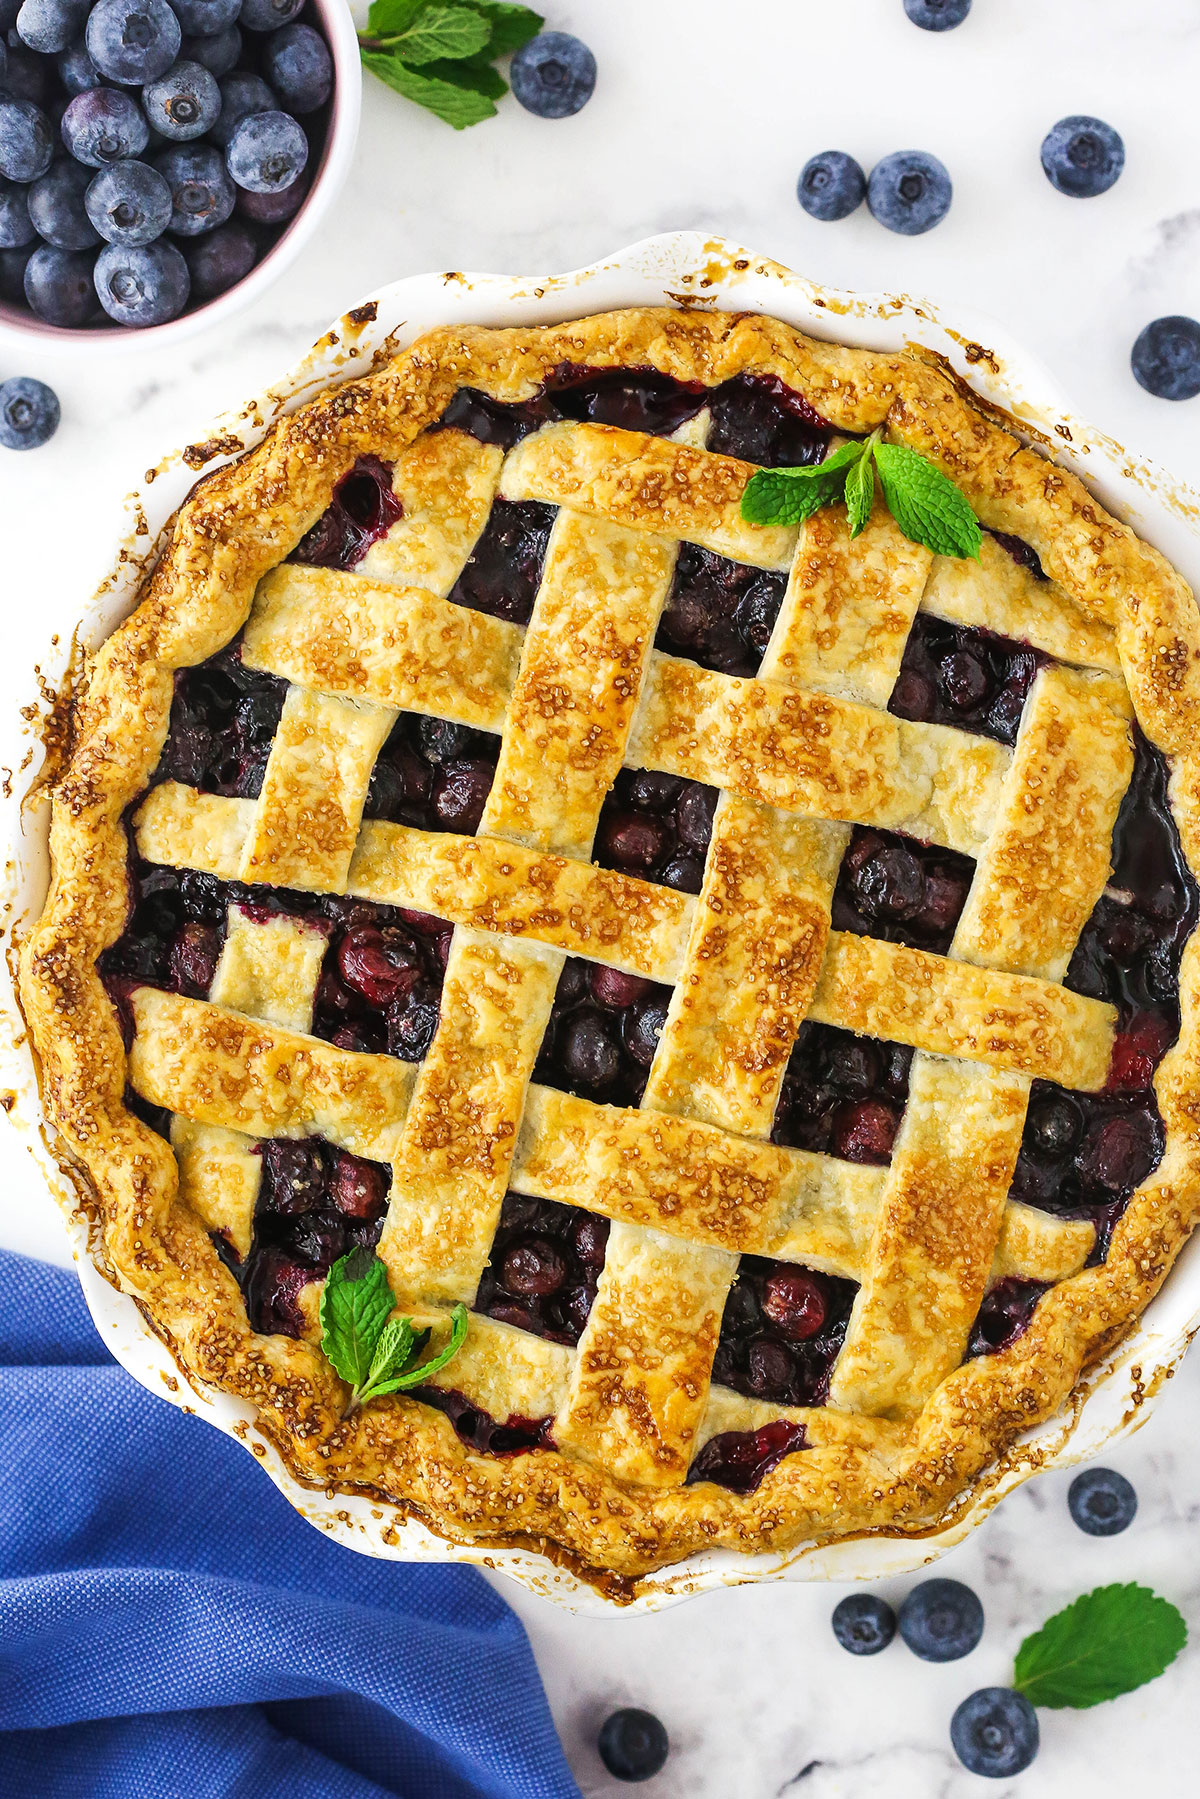 A blueberry pie on a kitchen countertop with a few fresh mint leaves on top as a garnish